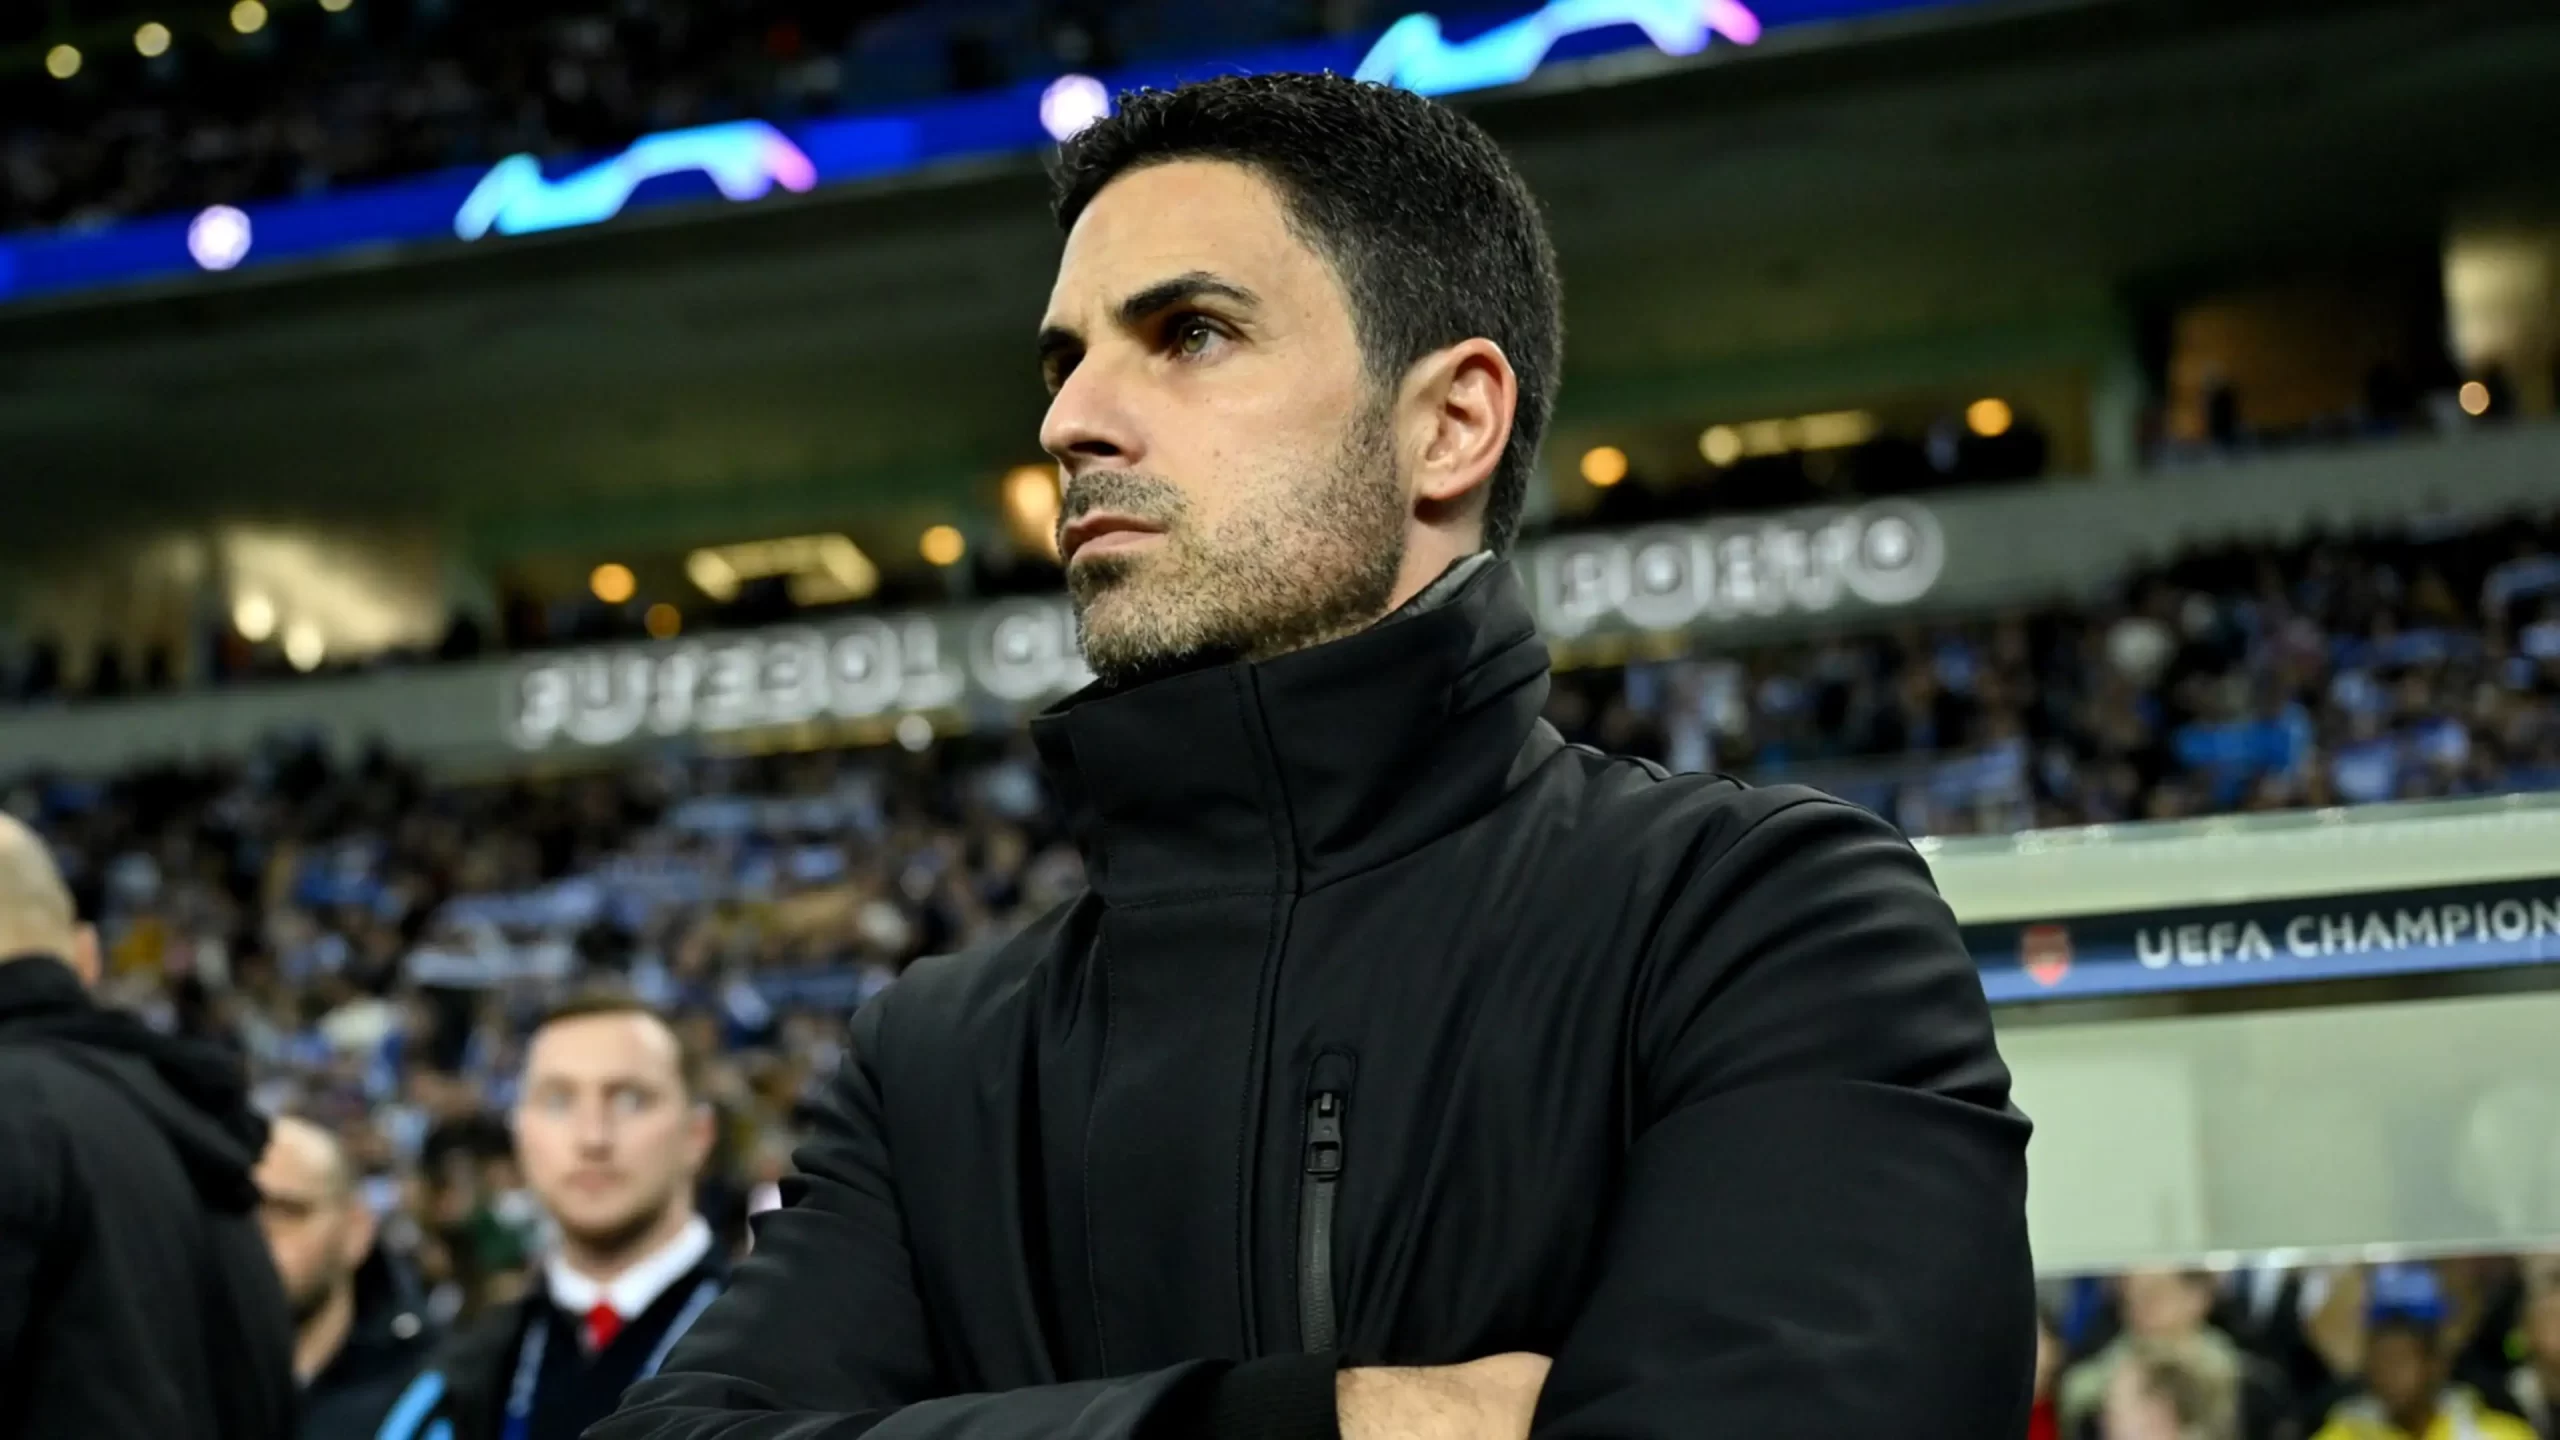 "The Plans have not changed" -- Mikel Arteta